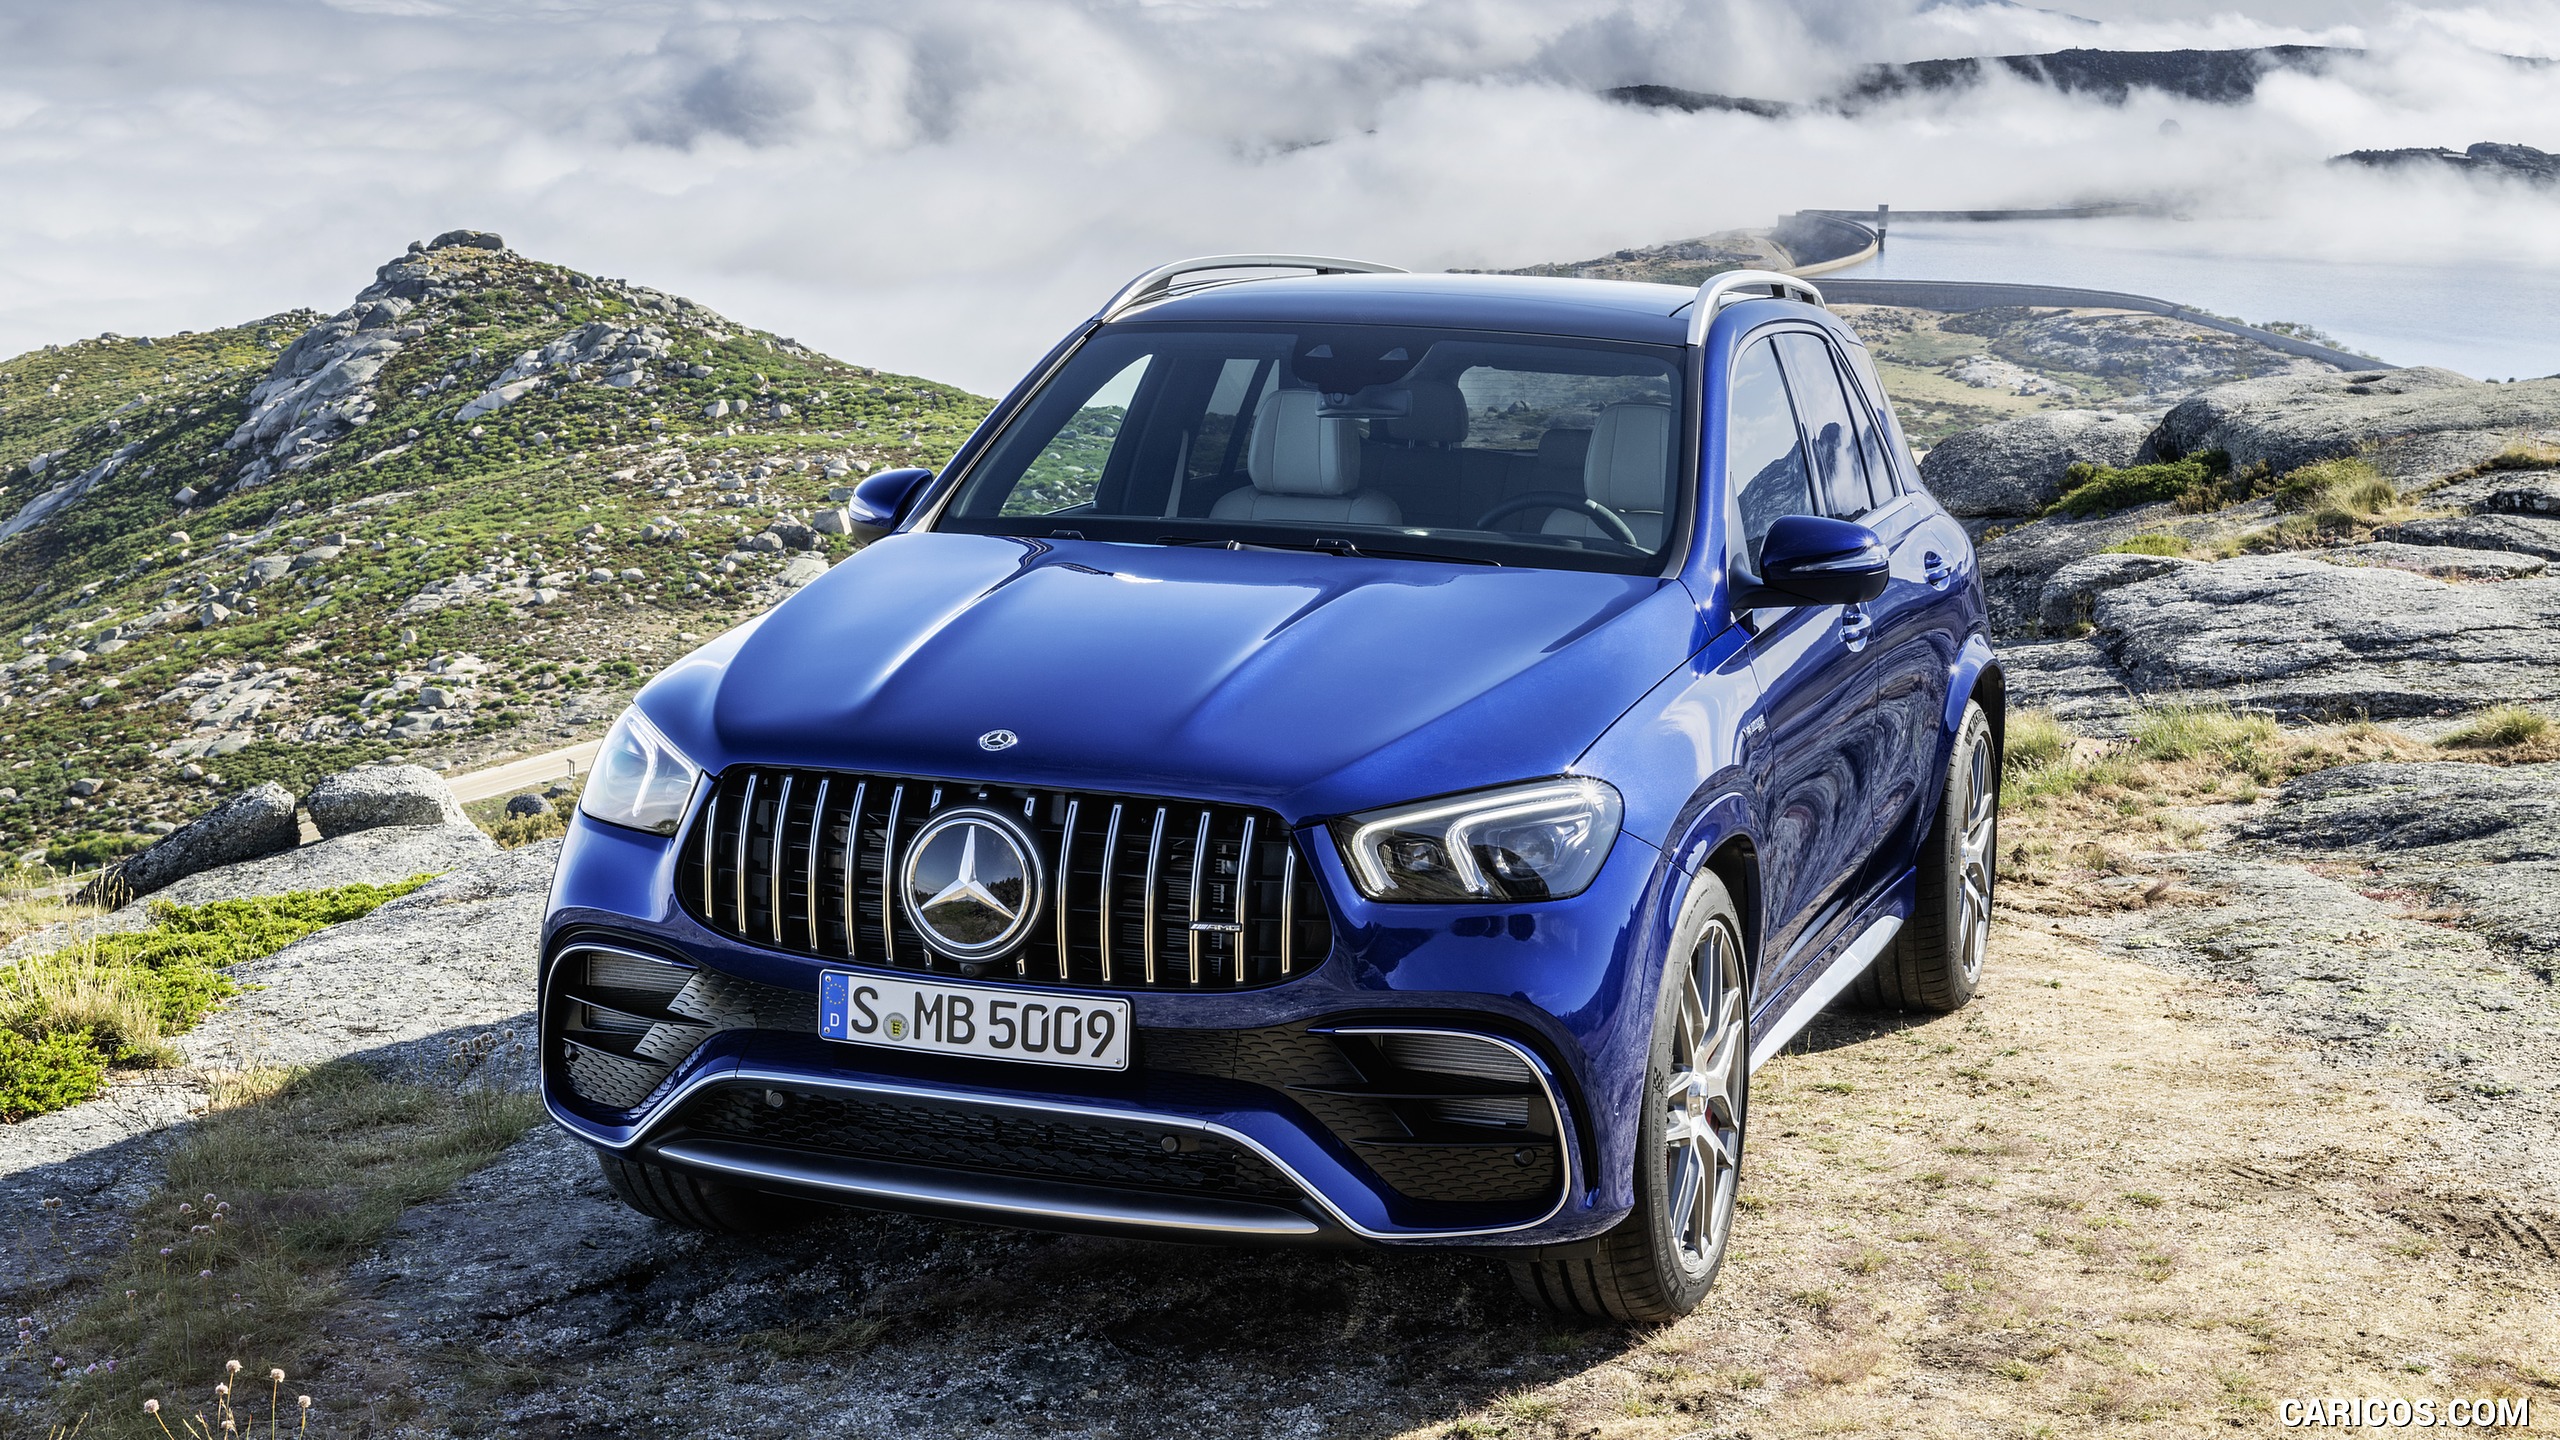 2021 Mercedes-AMG GLE 63 S 4MATIC - Front, #11 of 187